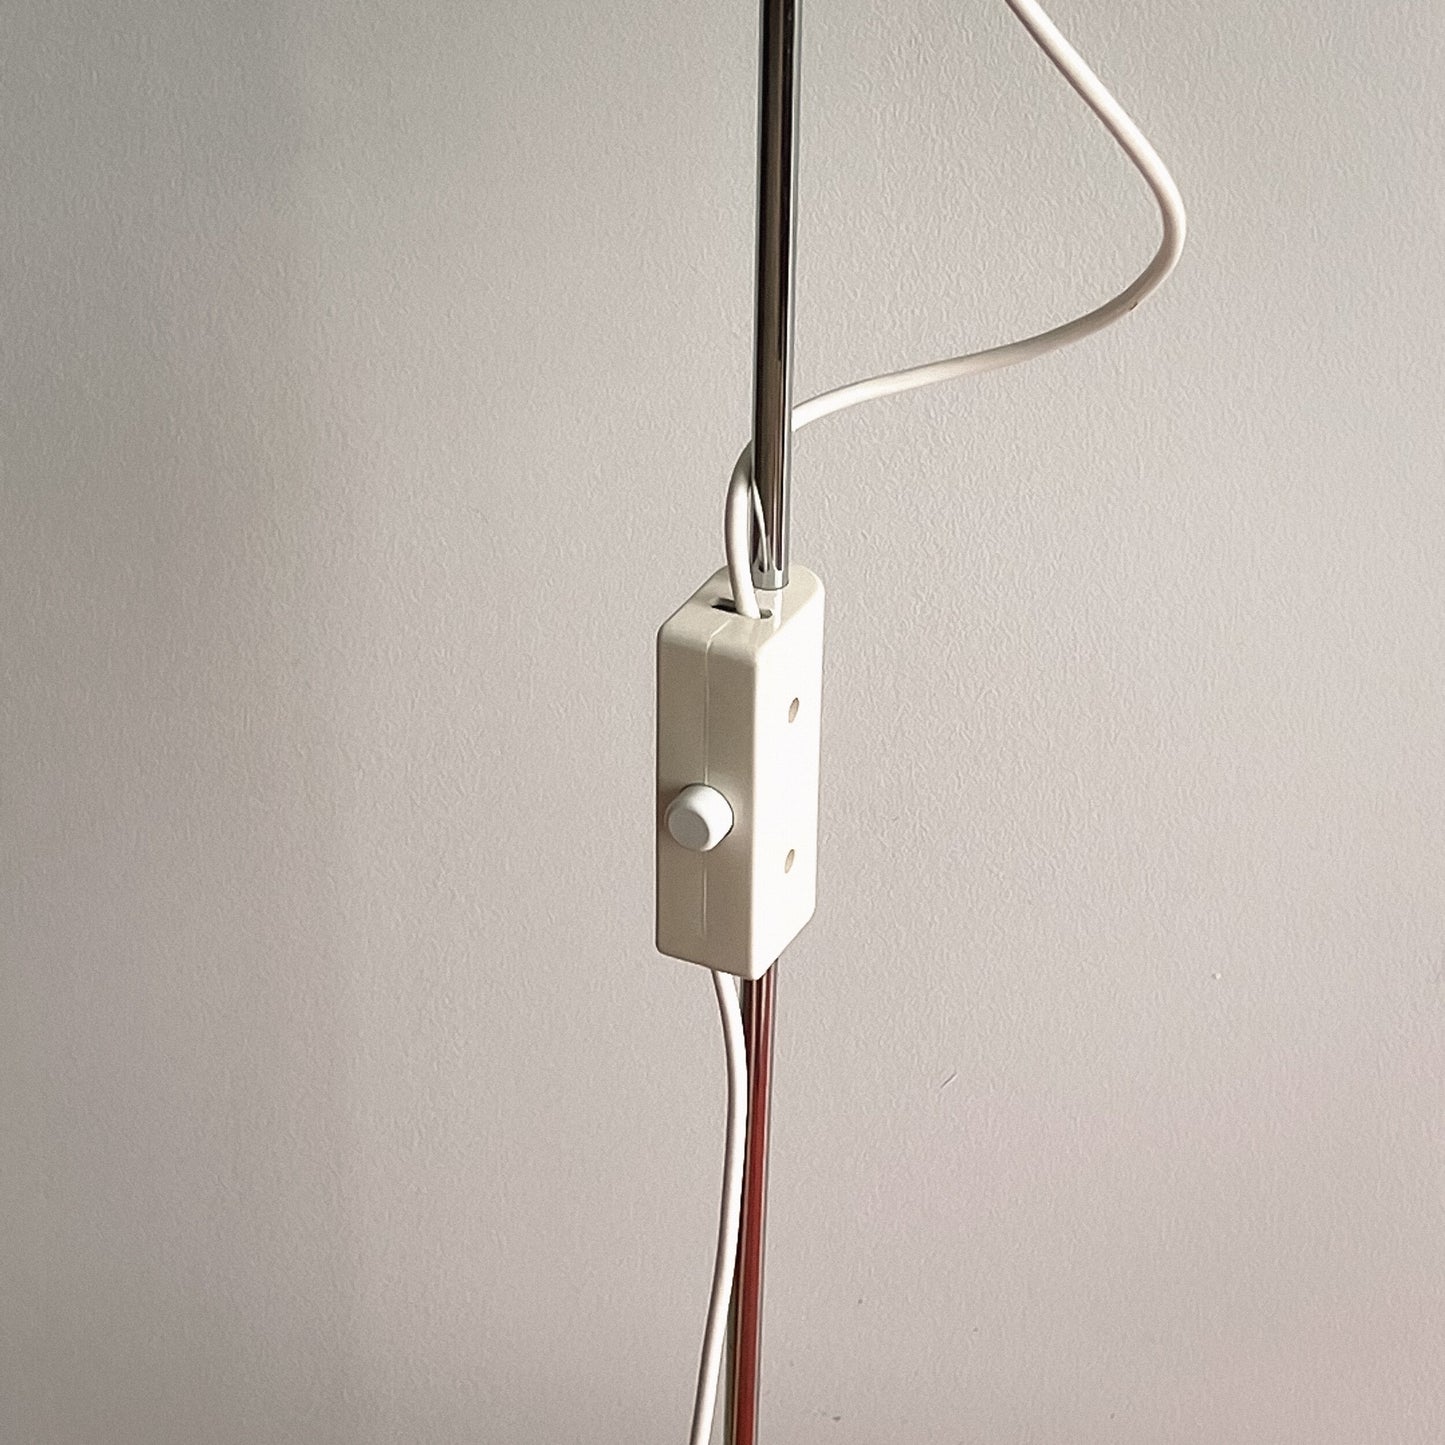 1970s Floor Lamp by Terence Conran